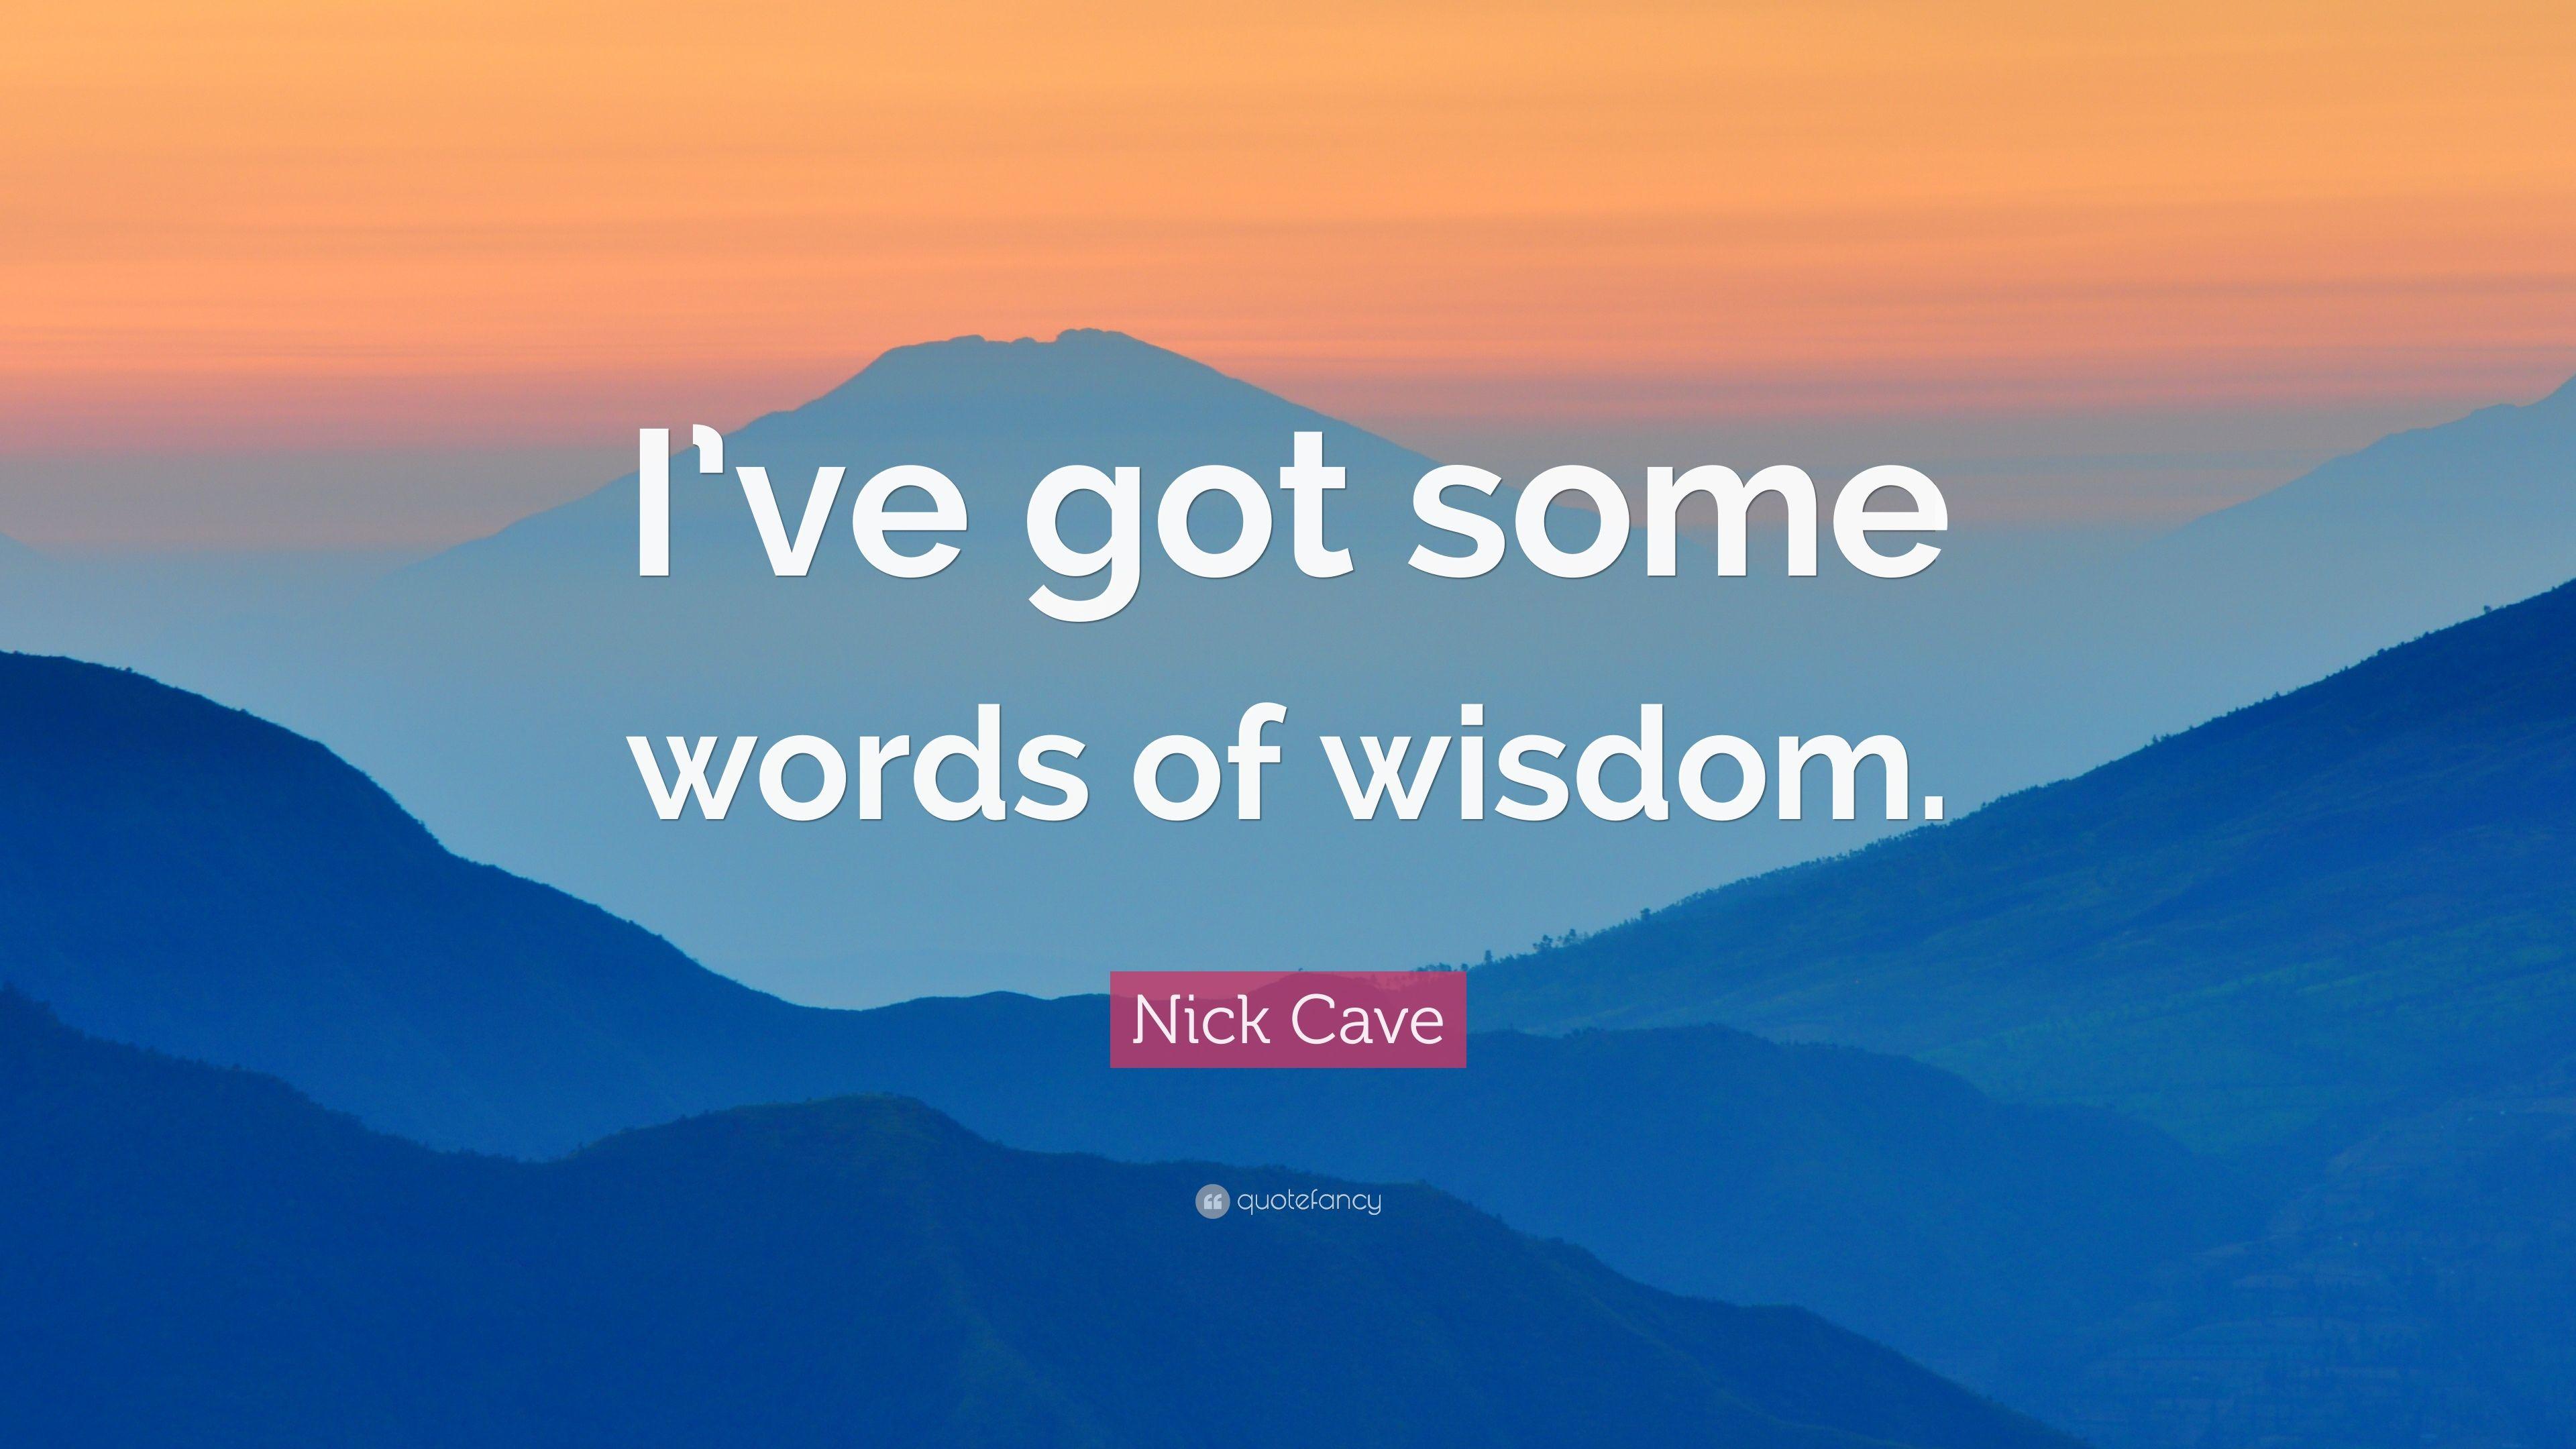 Nick Cave Quote: “I've got some words of wisdom.” 5 wallpaper